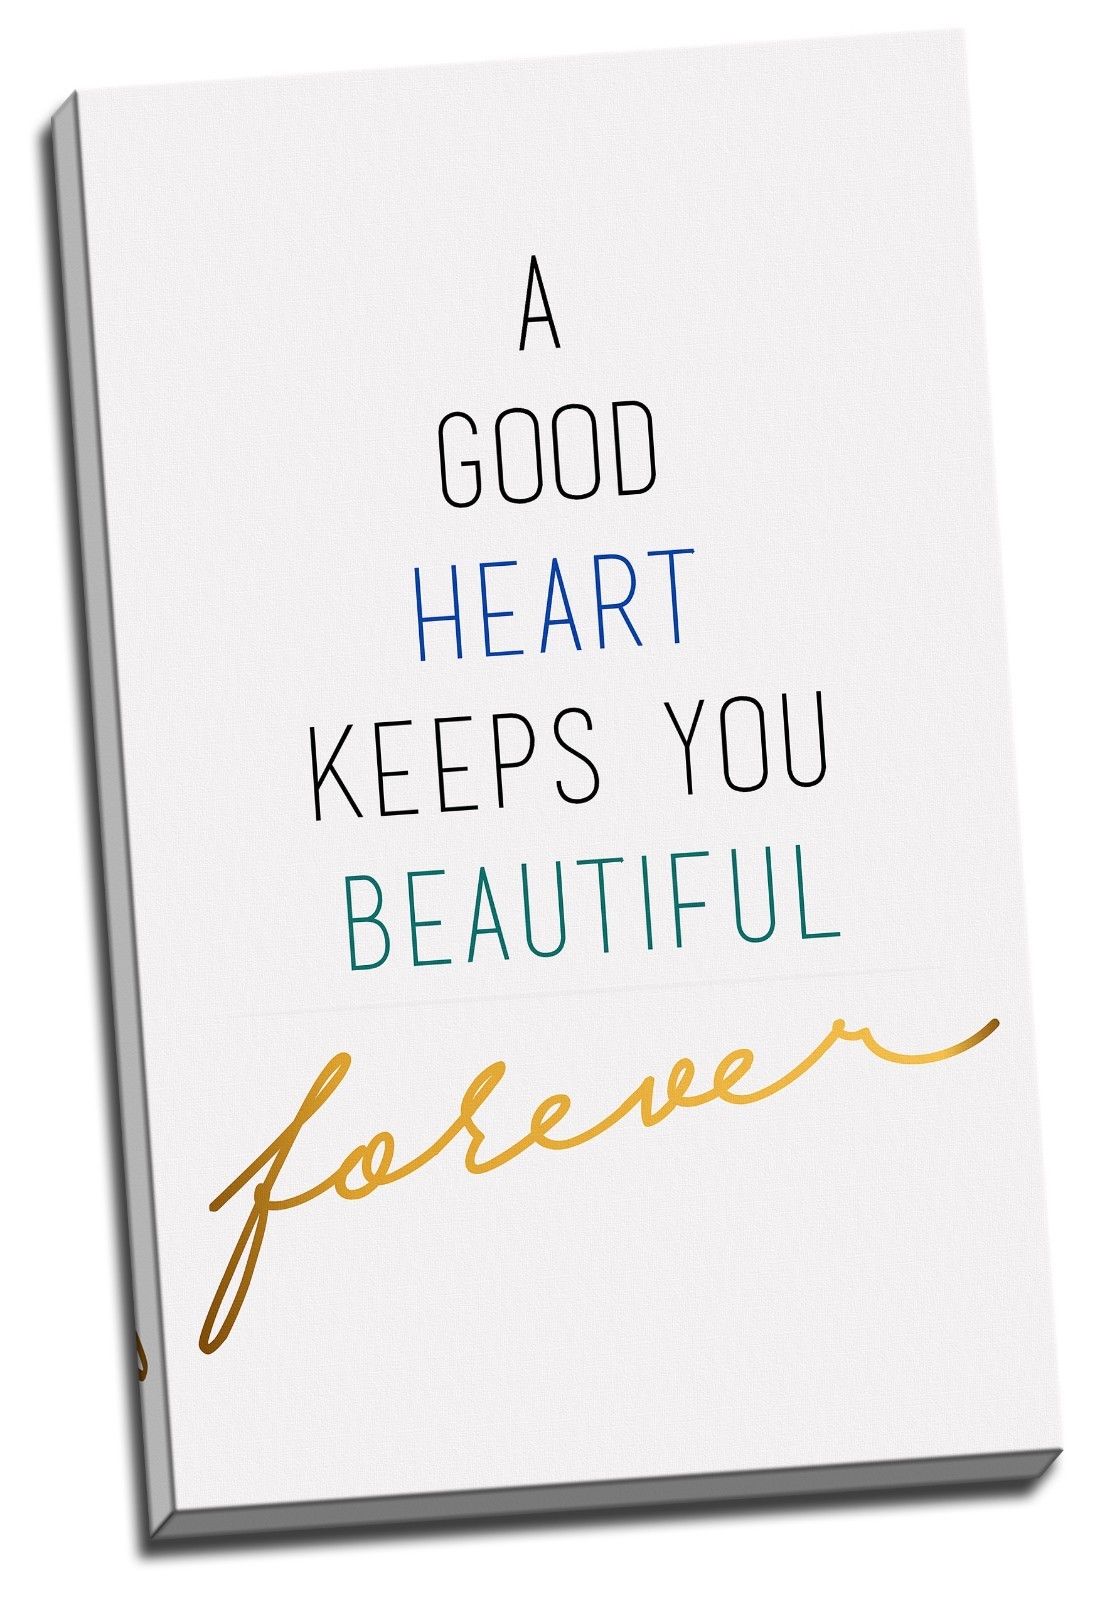 A good heart keeps you beautiful forever Framed Canvas Wall art Dinning room